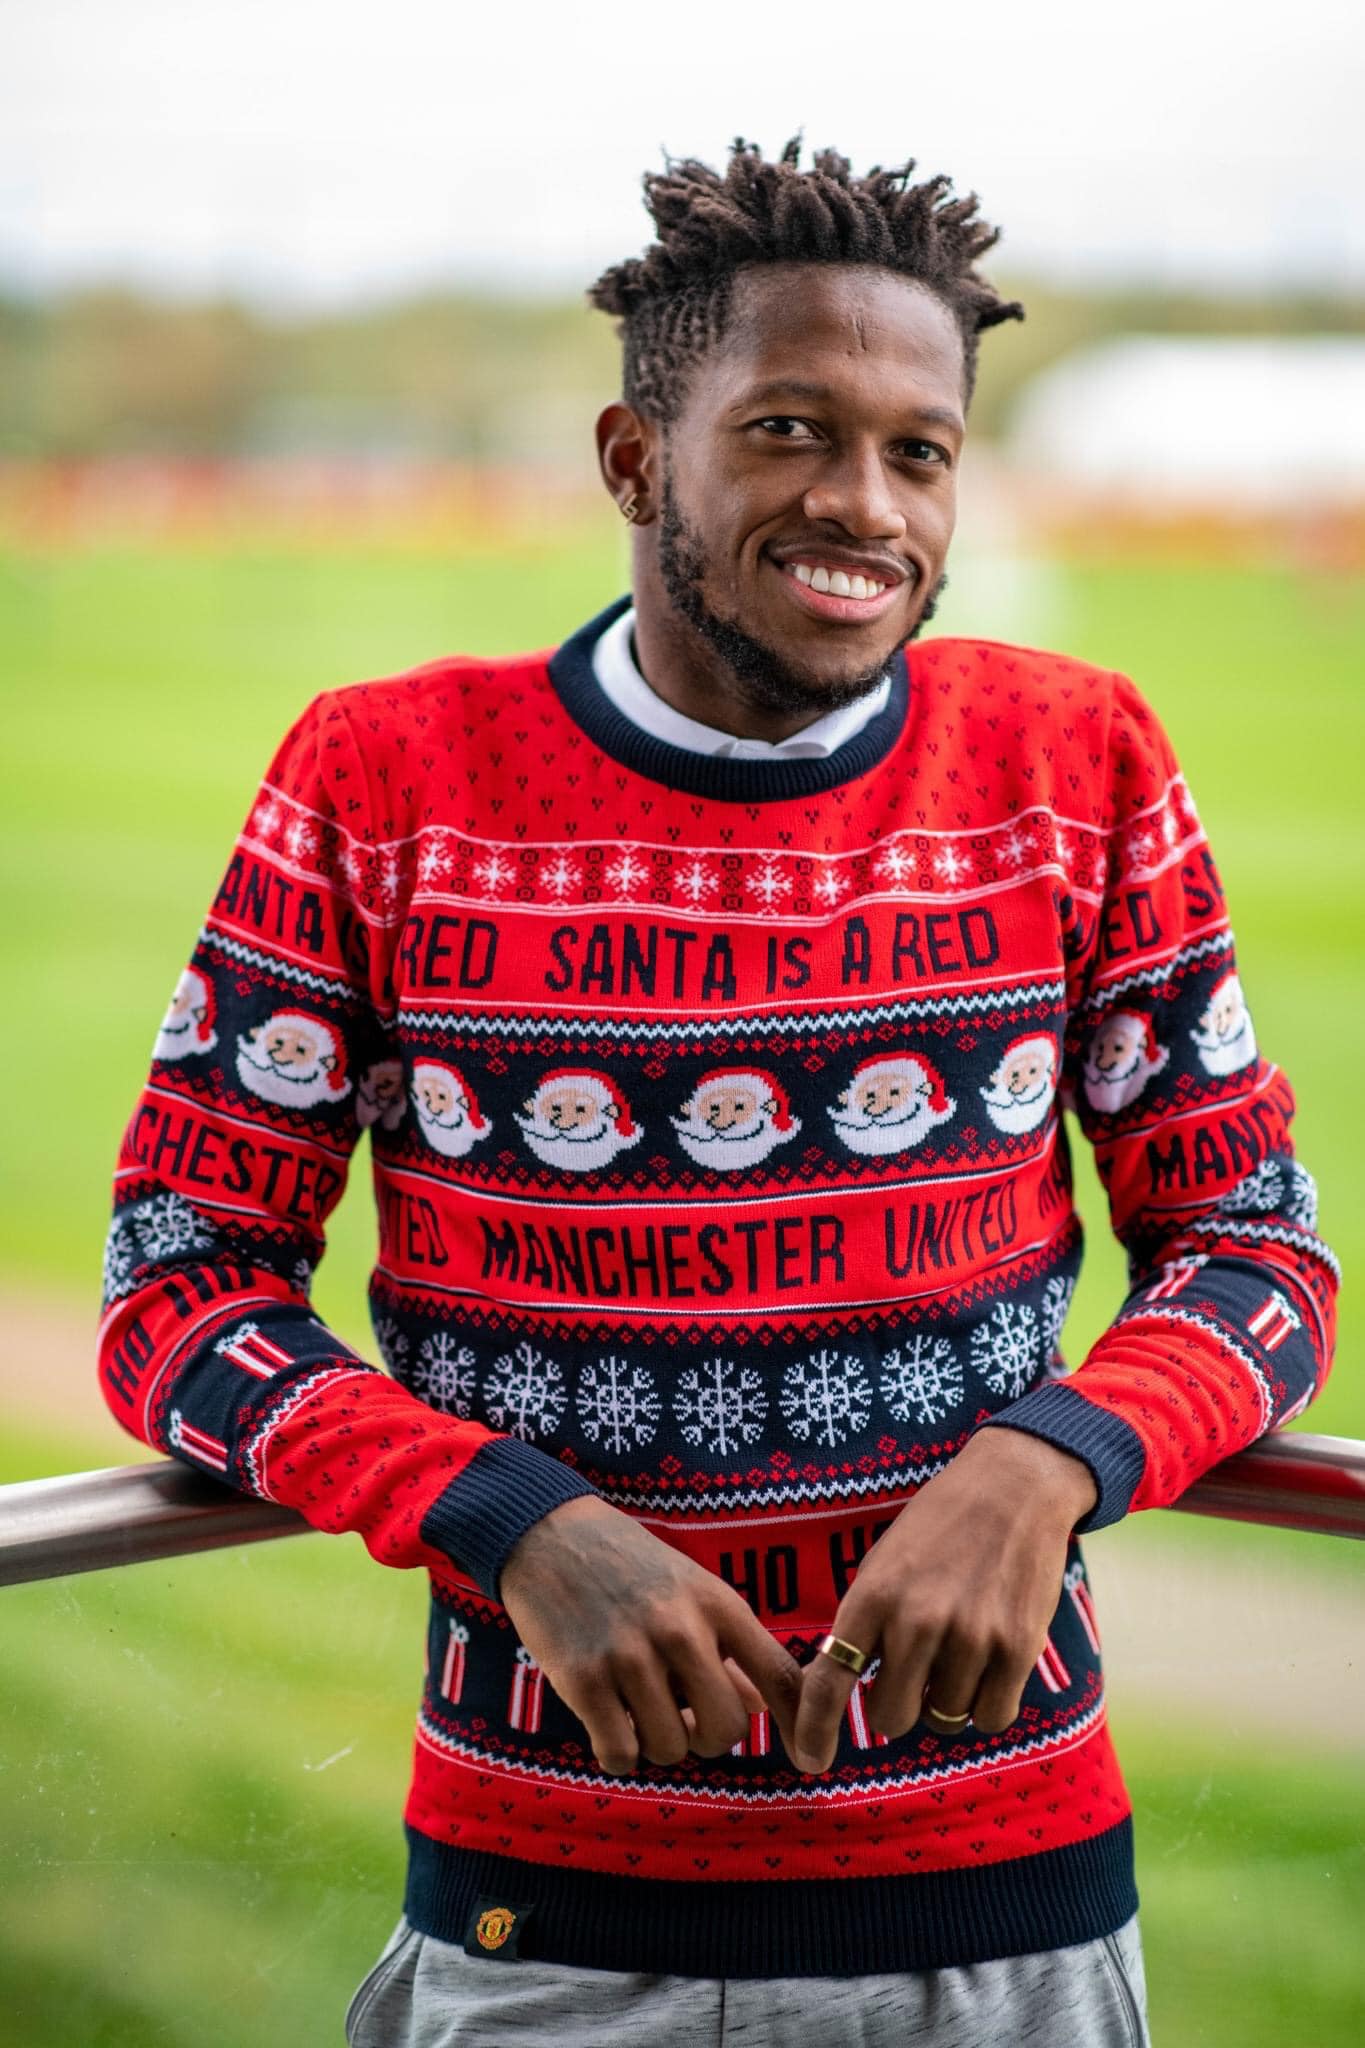 [HOT] Manchester United Santa is red Fred wearing ugly christmas sweater – Saleoff 071221